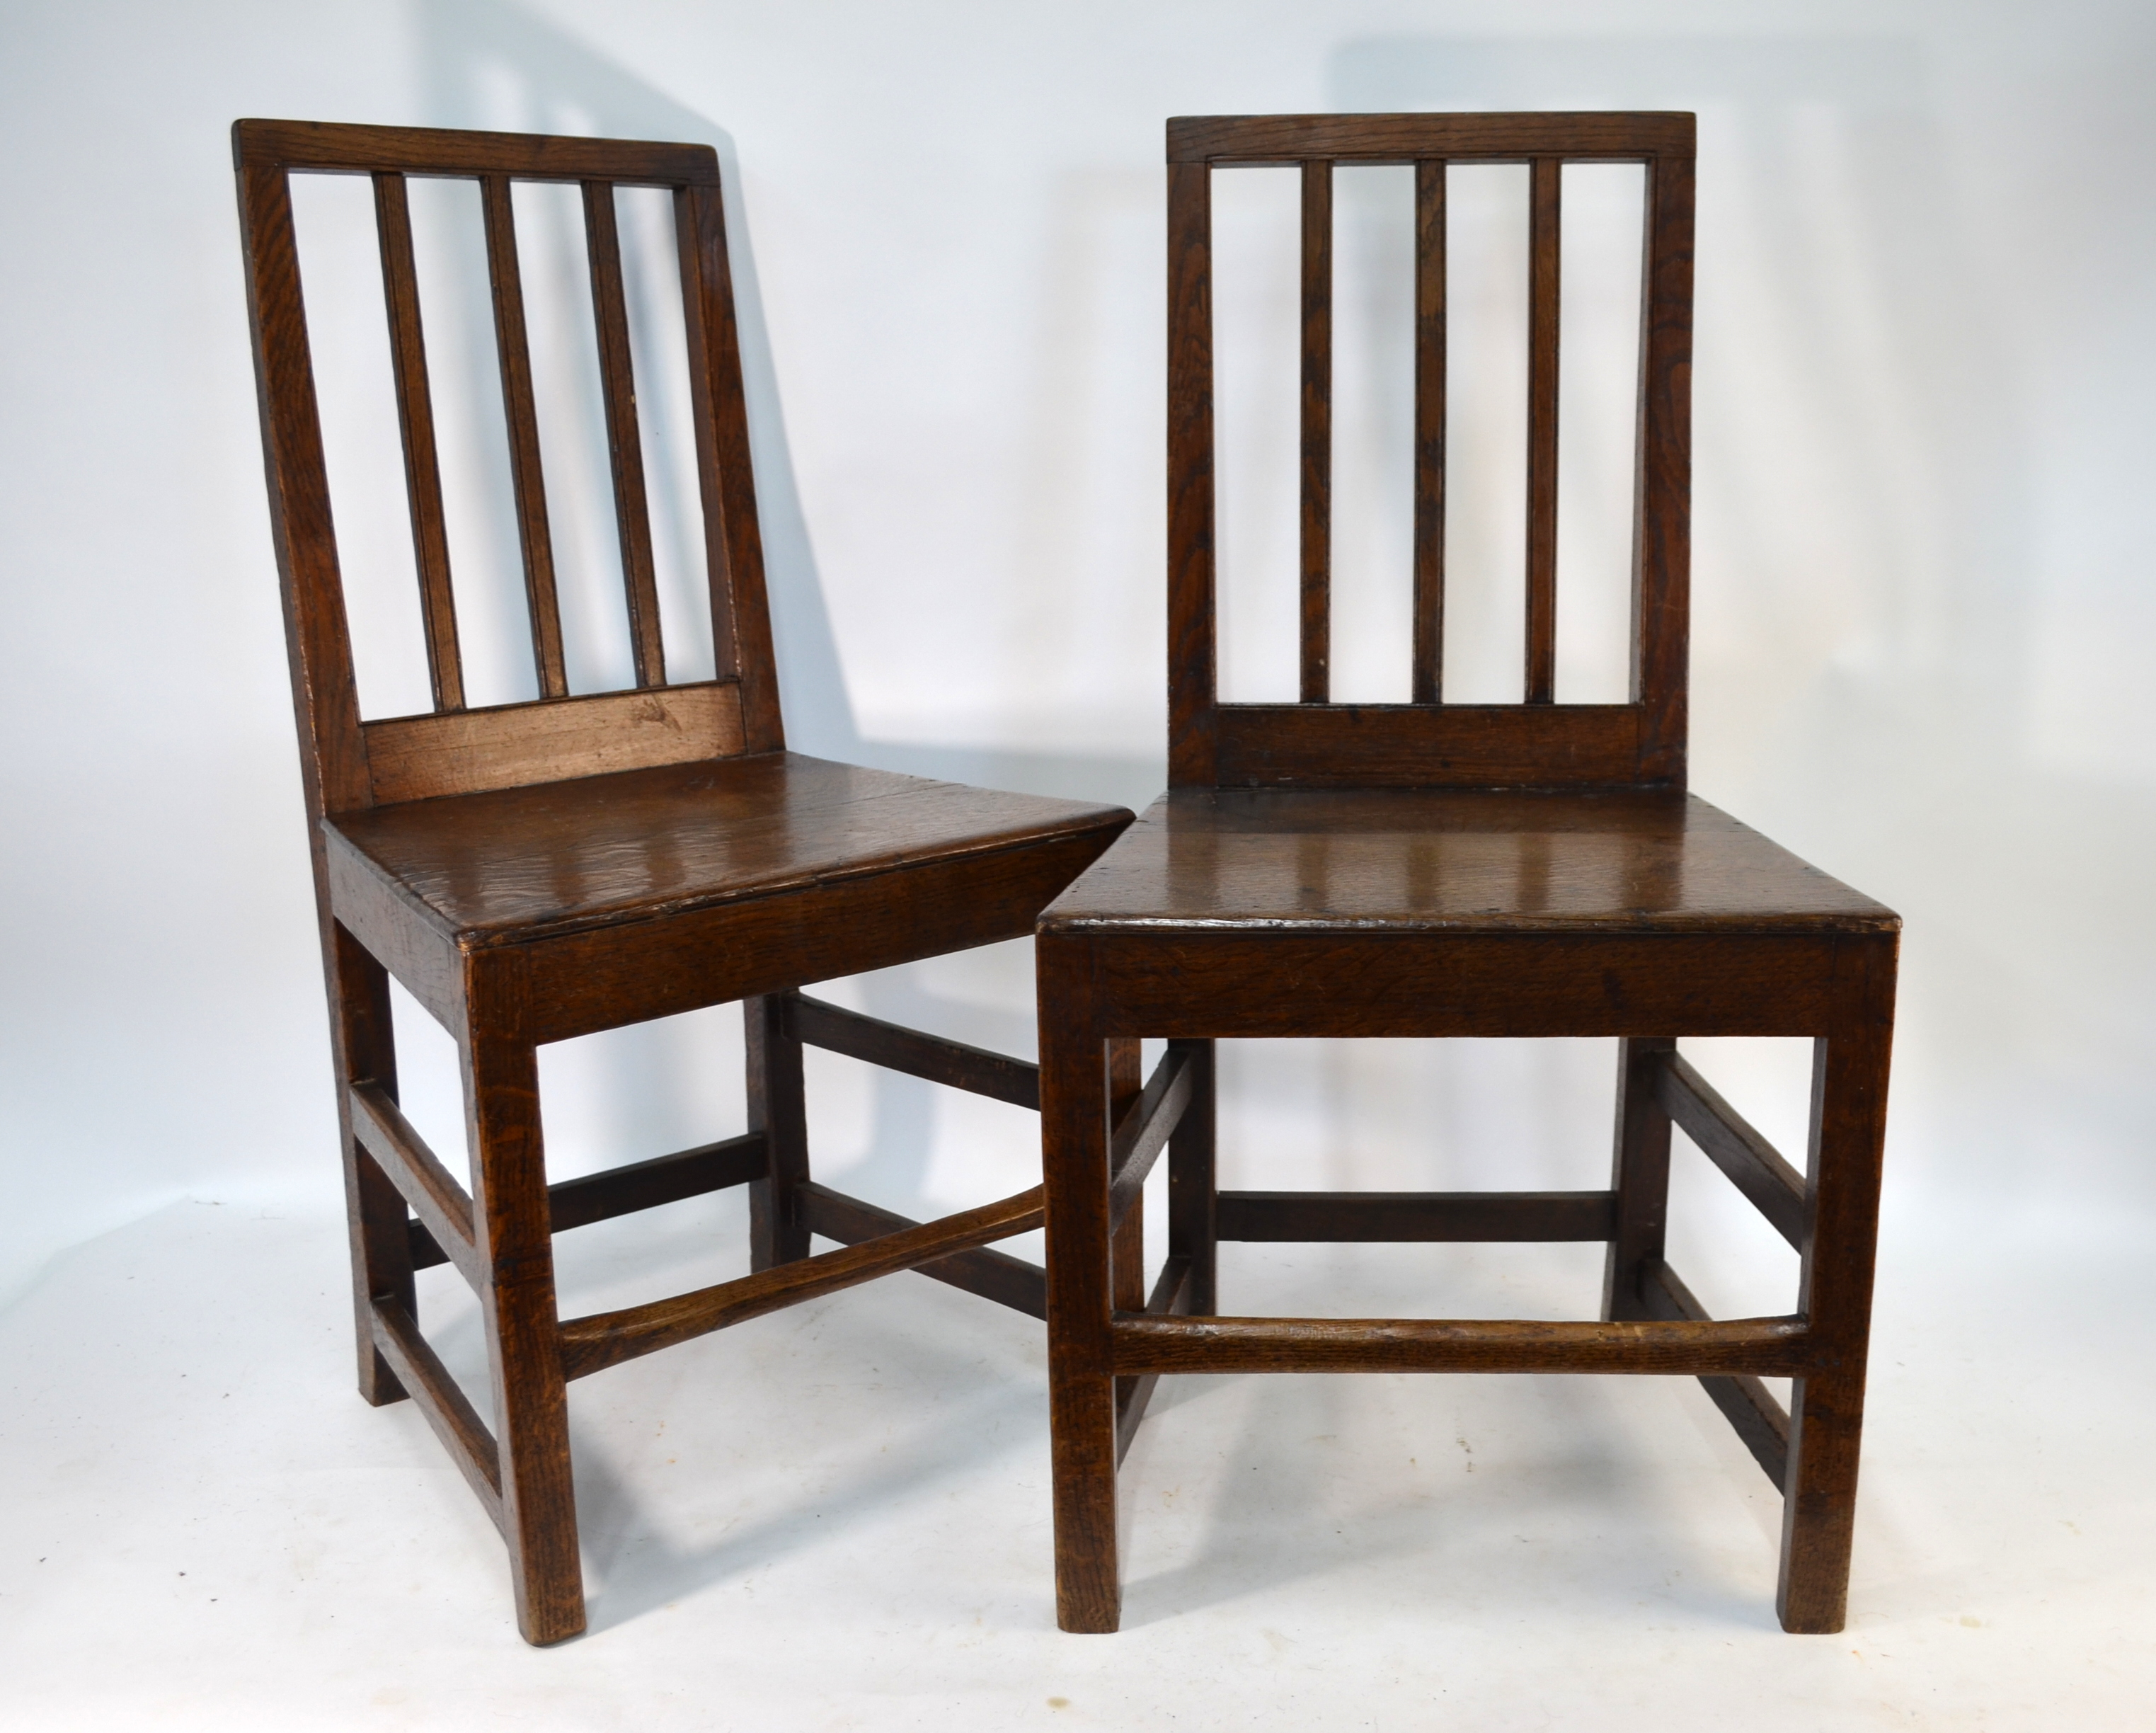 A set of six 18th/19th century oak country side chairs with plank seats (6)